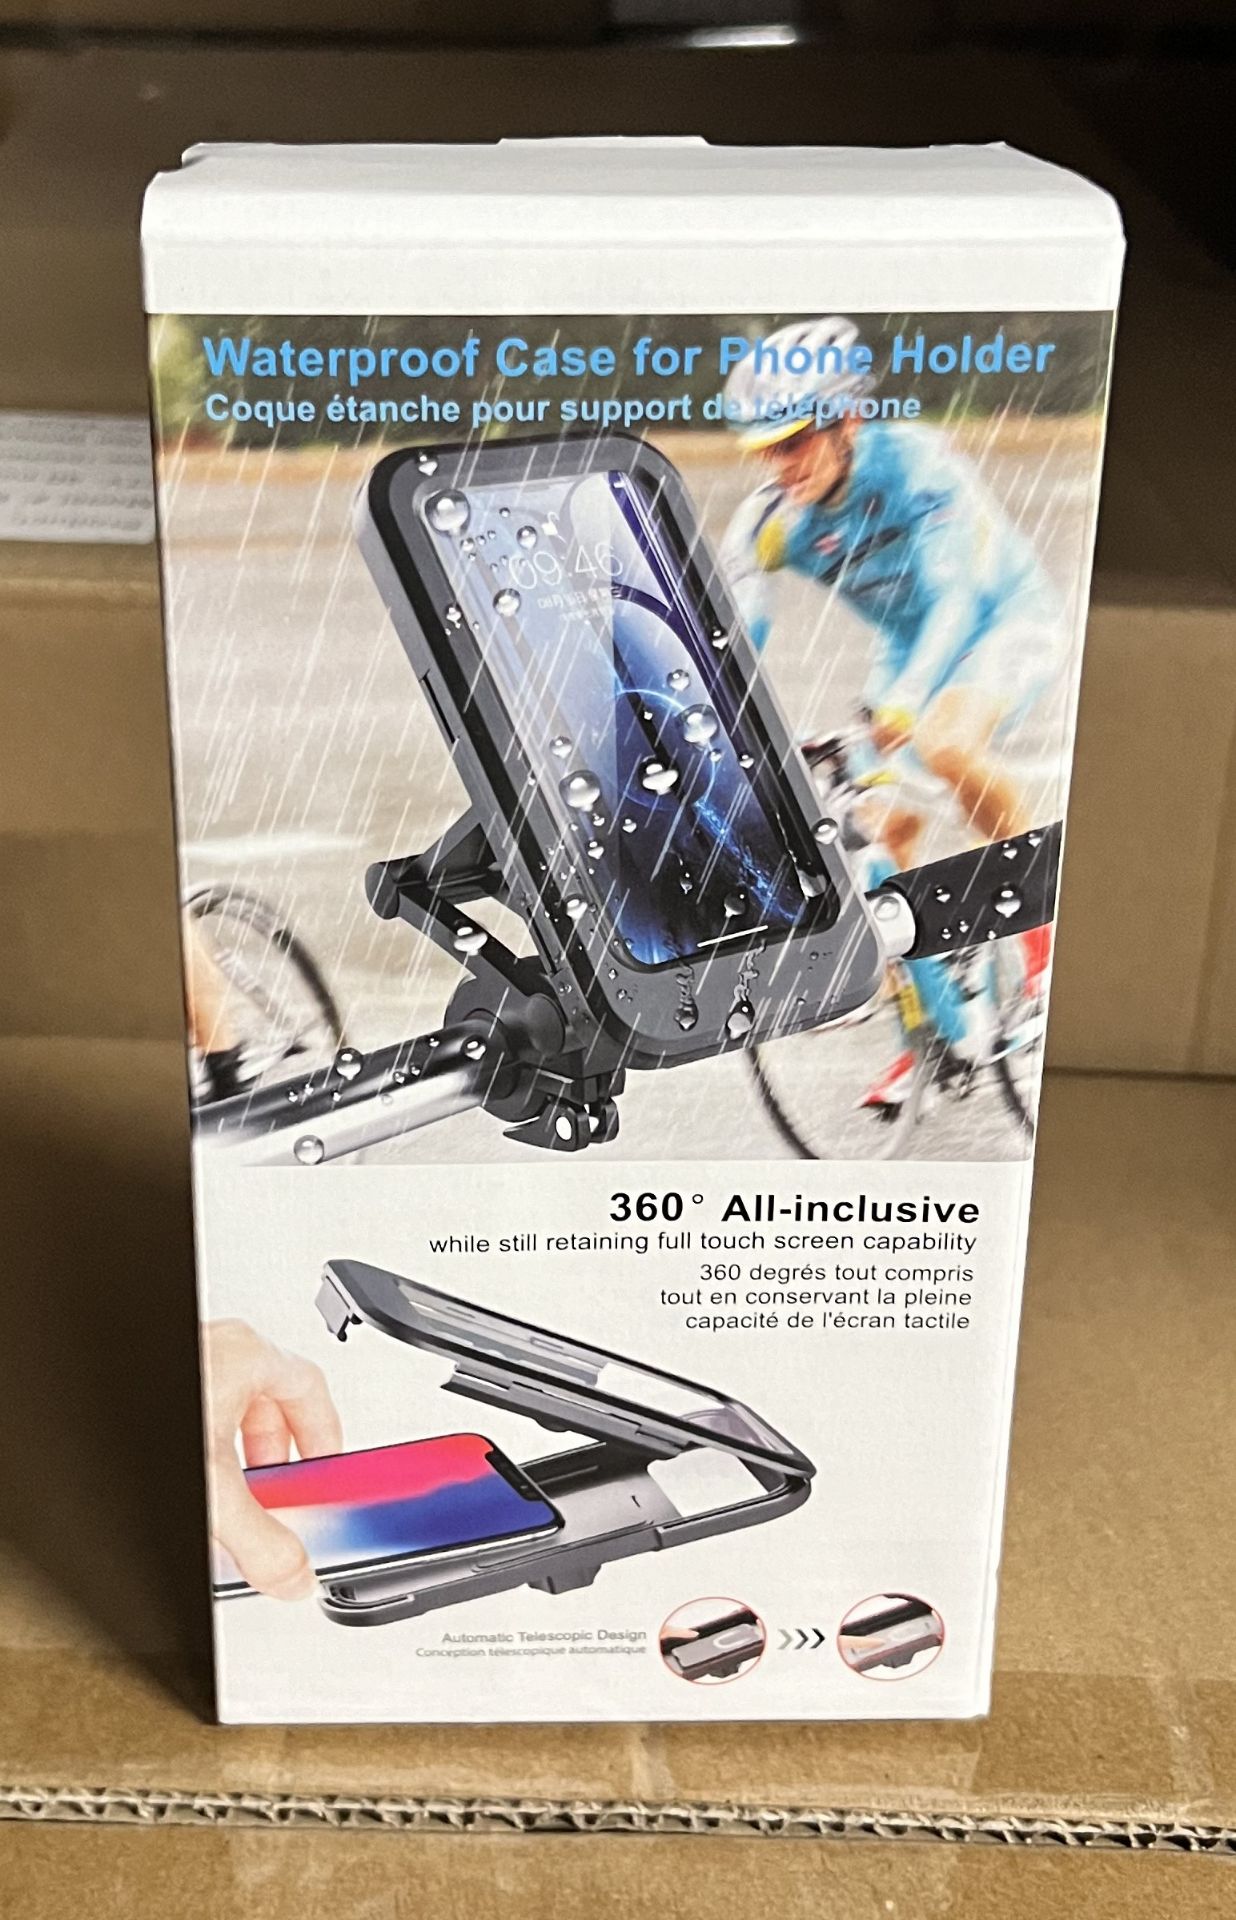 UNITS - RBSM UNIVERSAL BICYCLE PHONE HOLDERS (NEW) (MSRP $30)